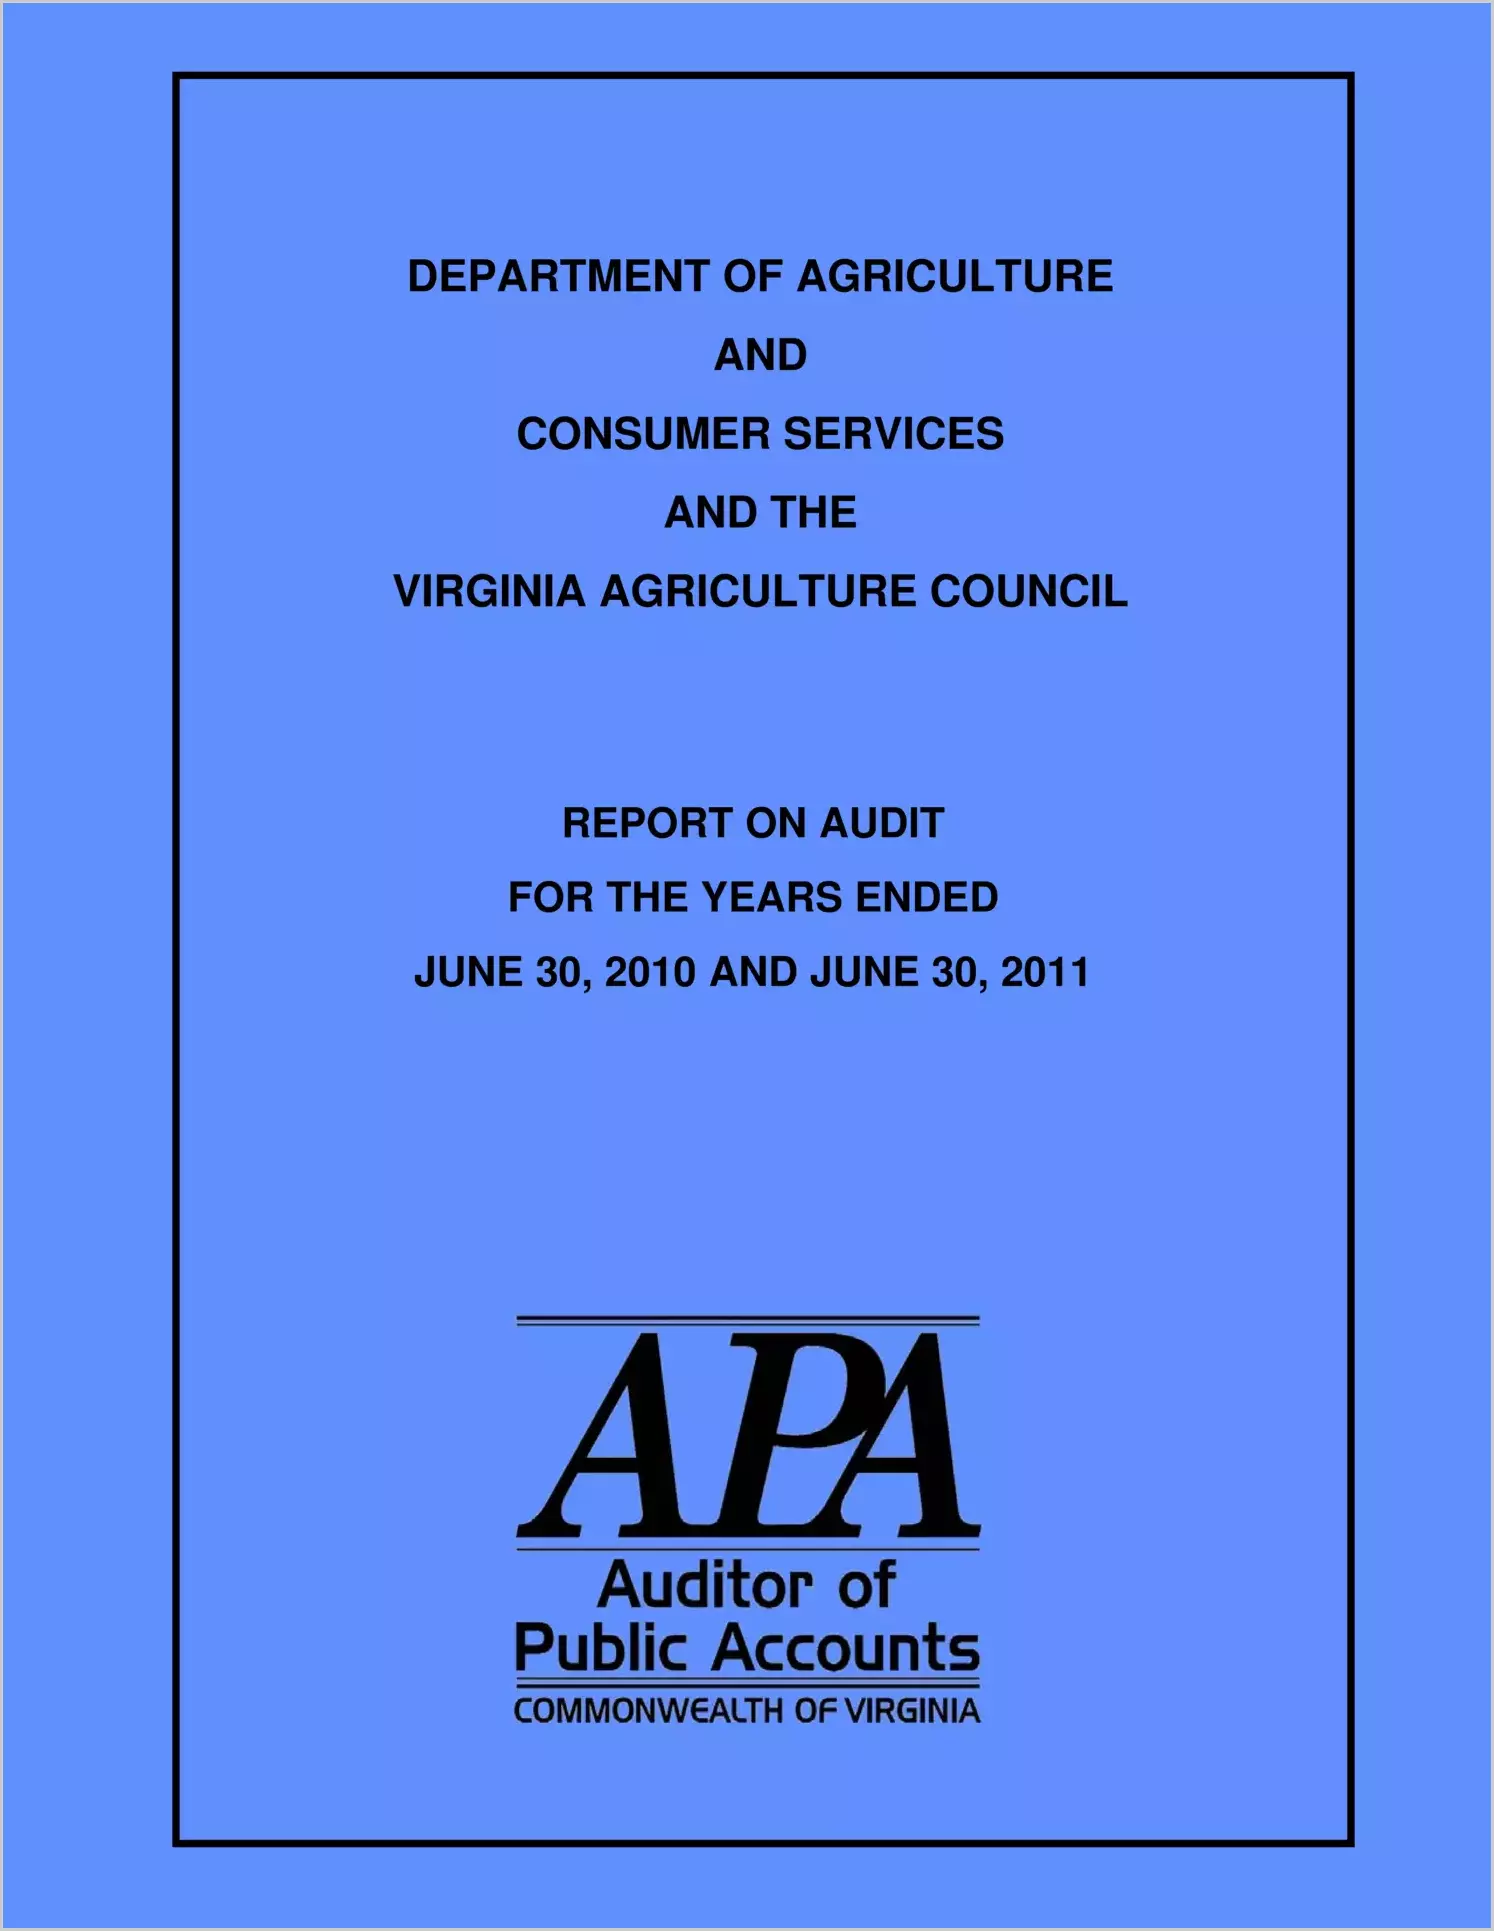 Virginia Department of Agriculture and Consumer Services and the Virginia Agricultural Council for the years ended June 30, 2010 and June 30, 2011